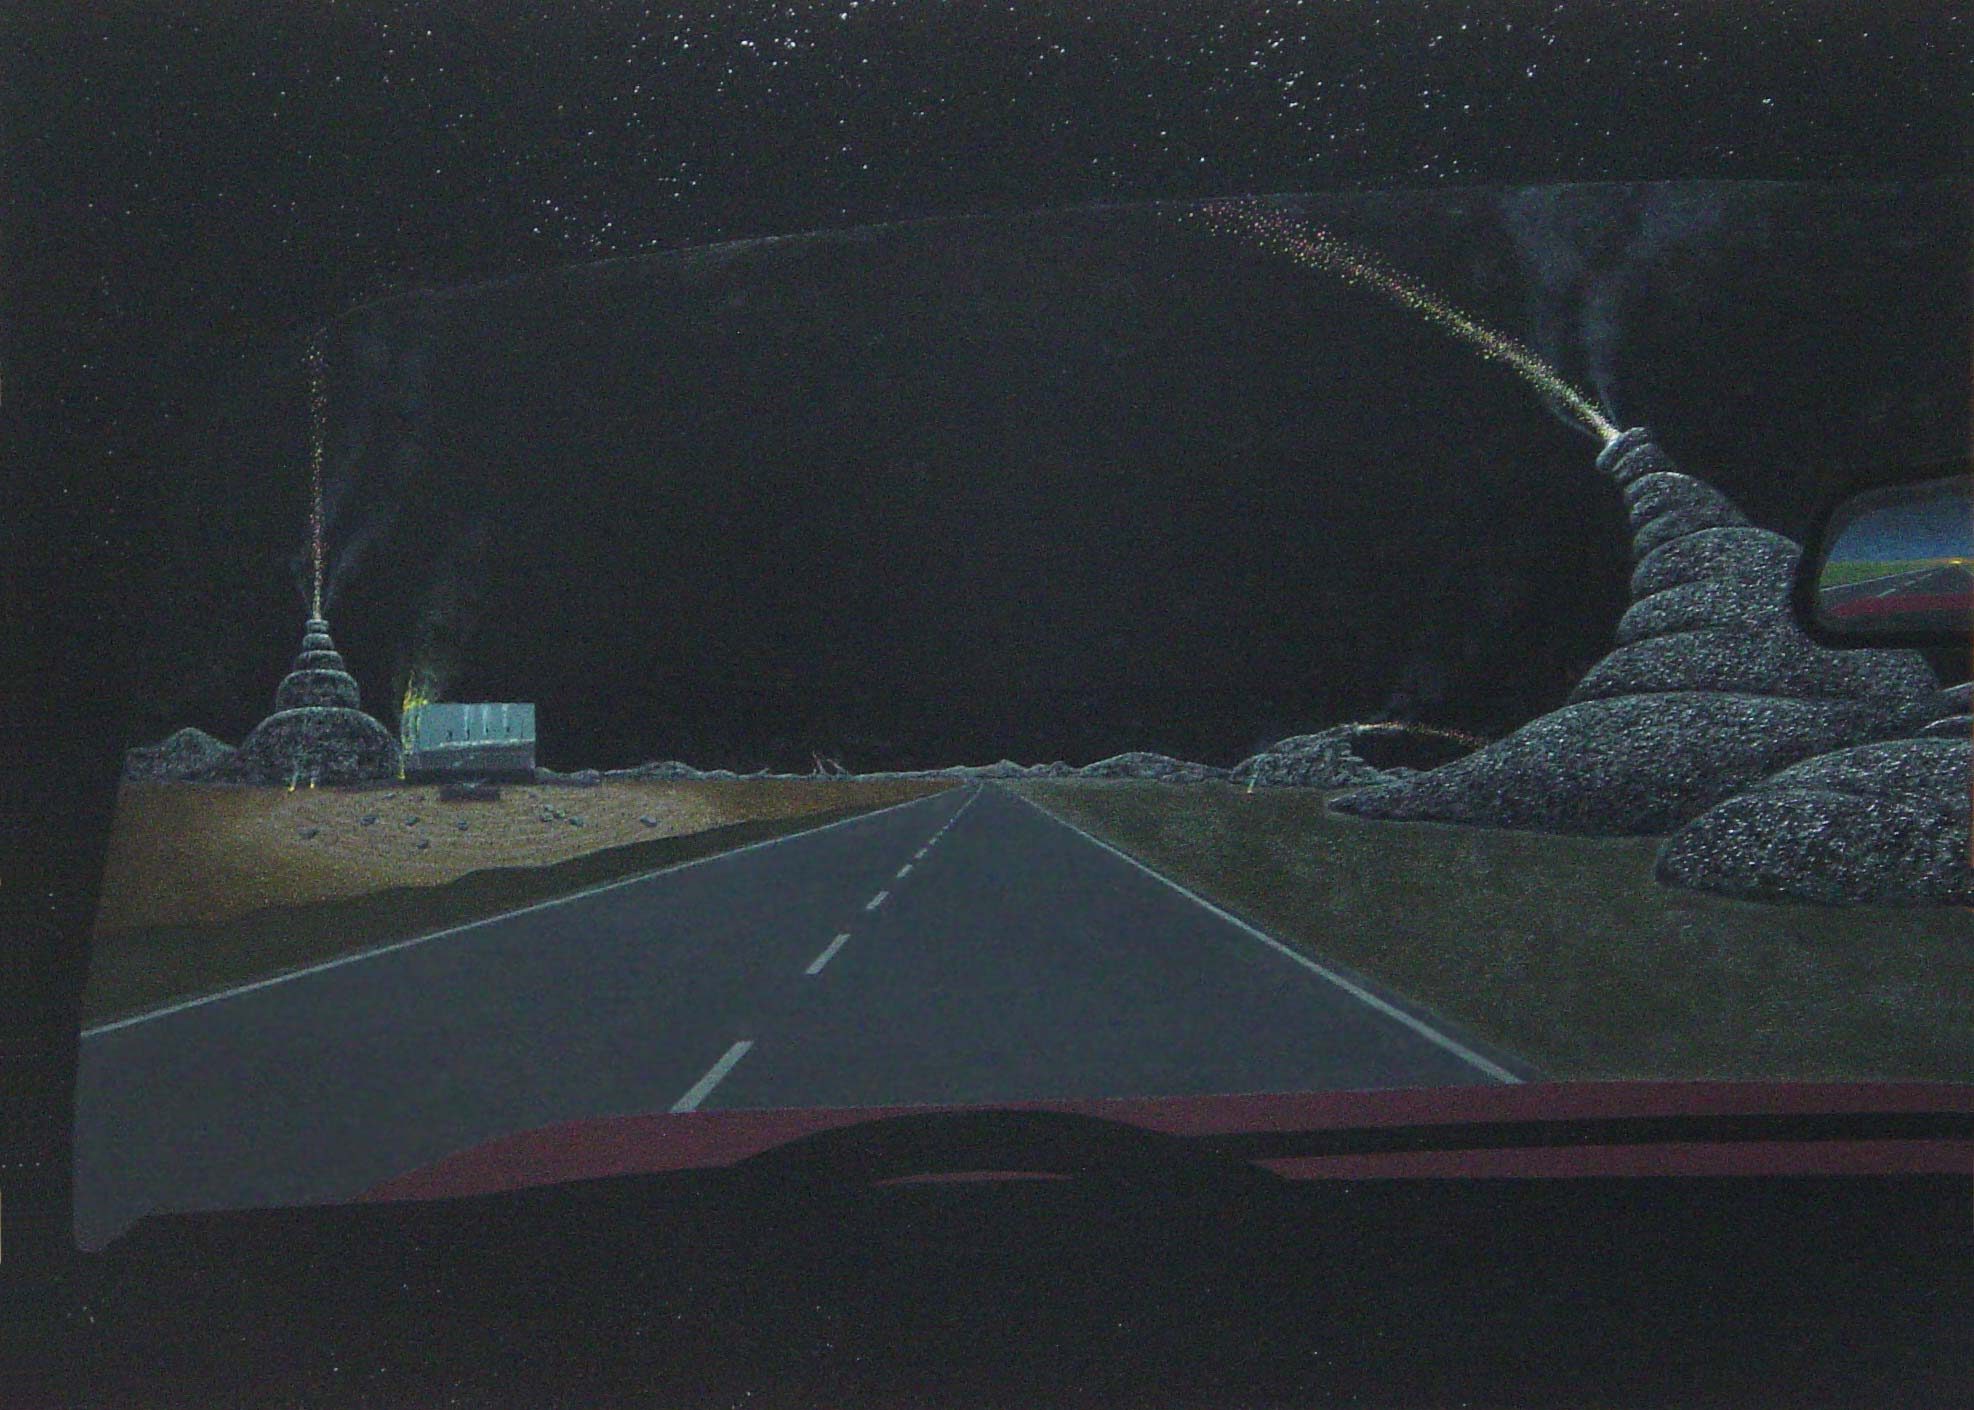 view from the driver's seat of a car, showing a group of playful but troublesome volcanos